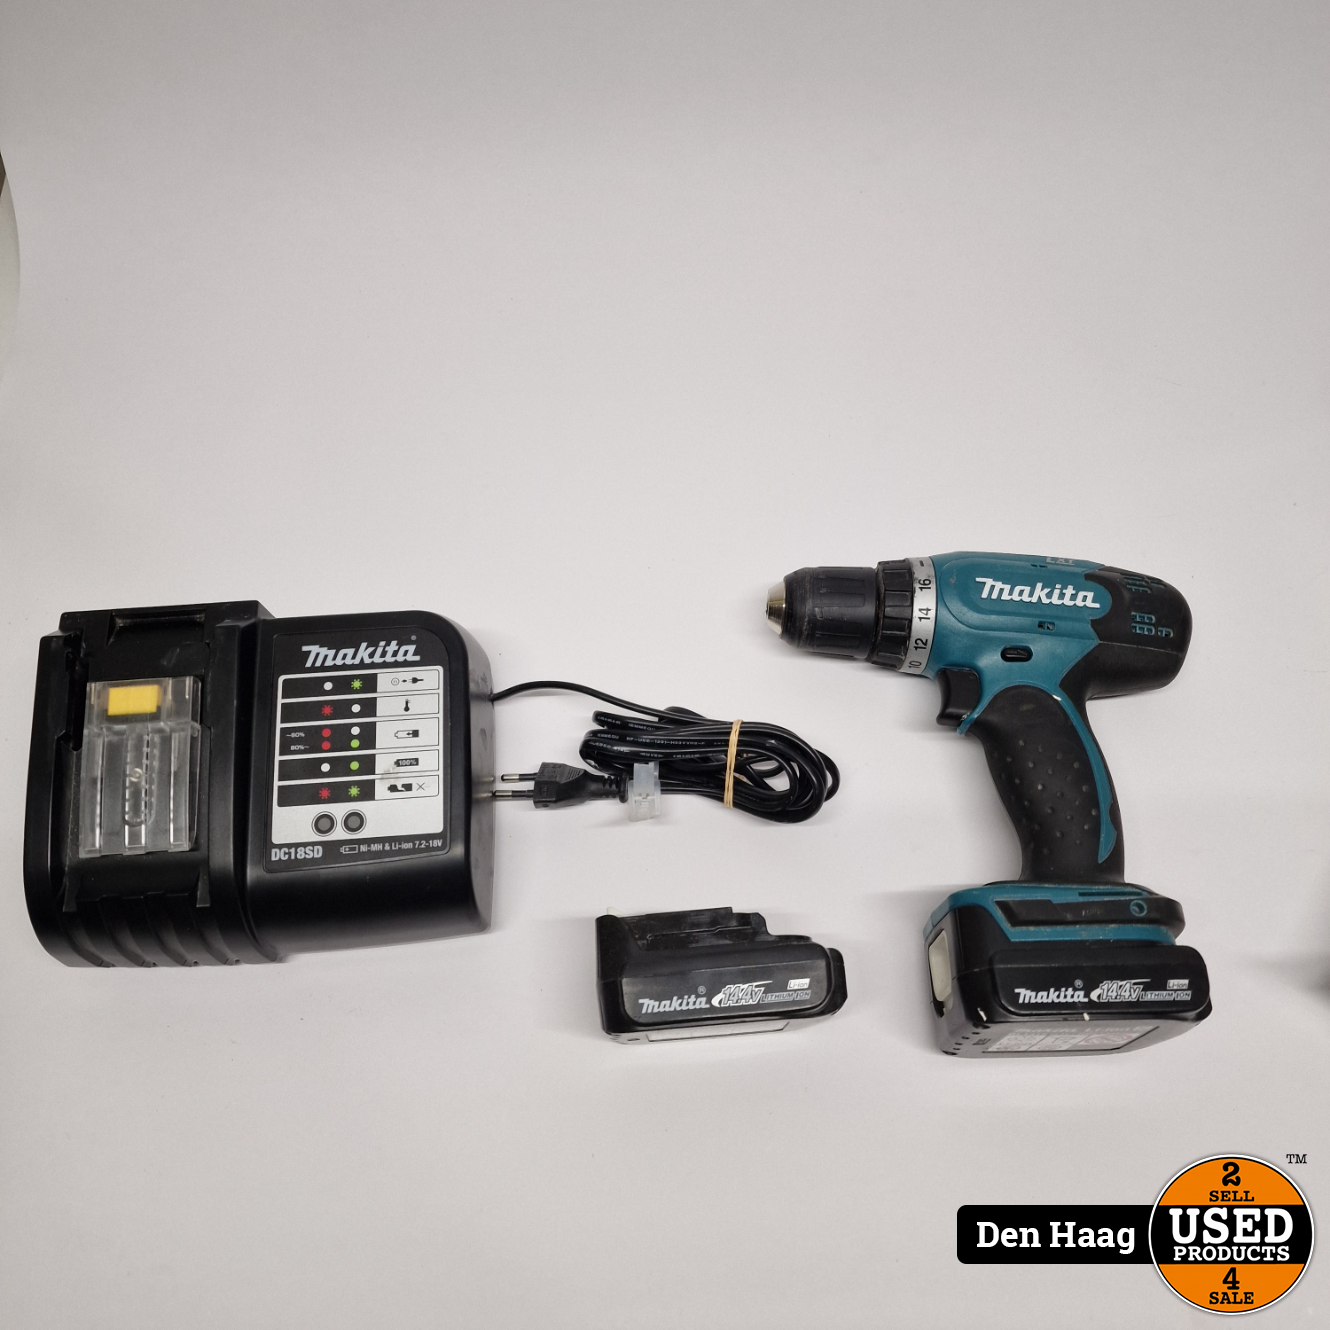 Makita DDF343SYX3 14,4V Set | nette staat Used Products Den